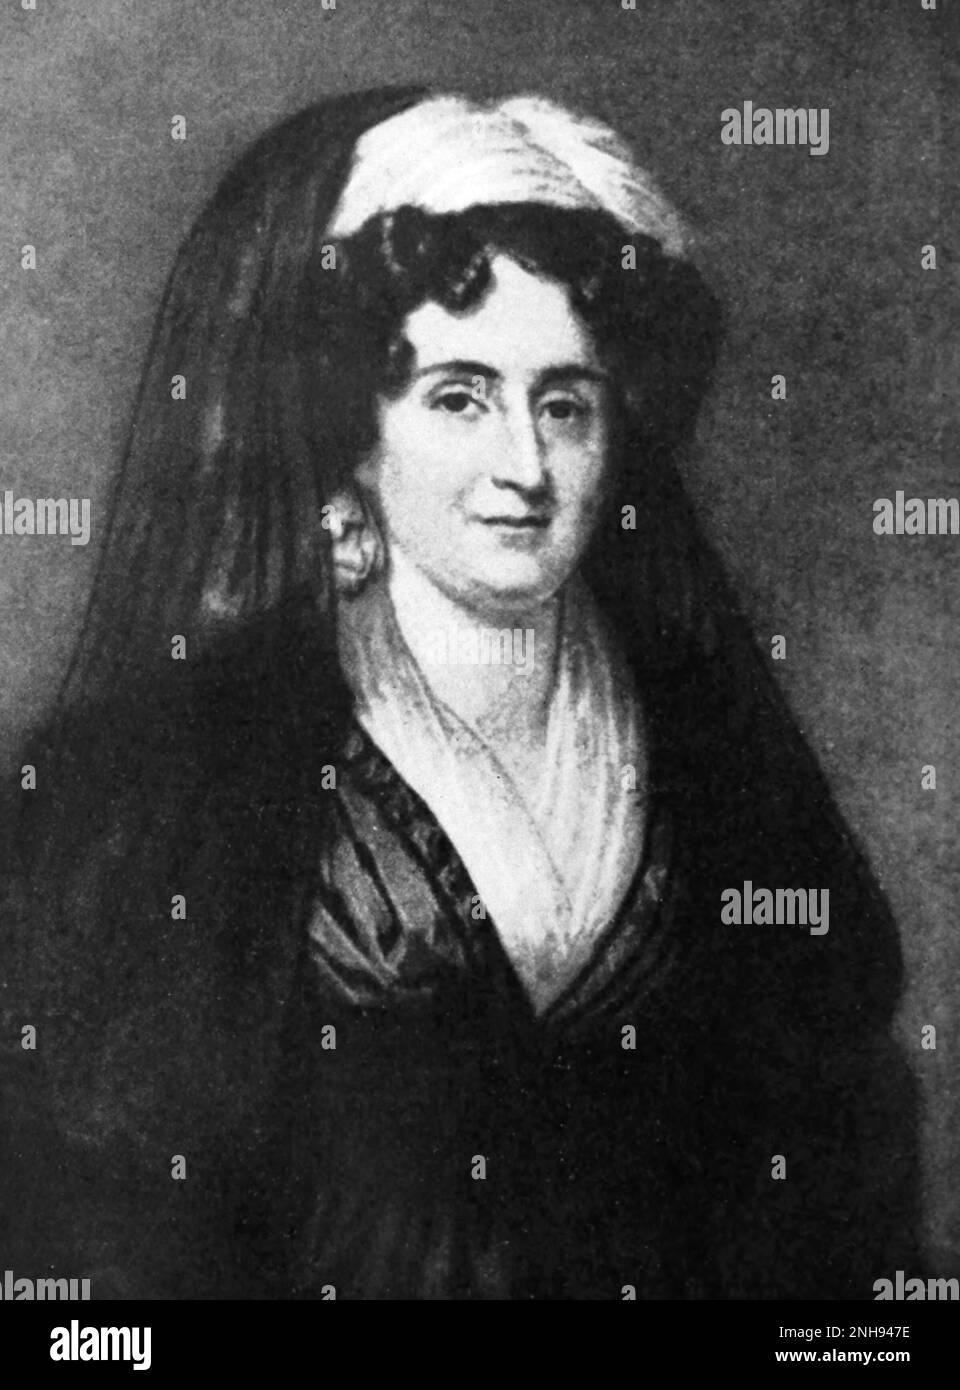 Emma Hart Willard (1787-1870) was an American woman's education activist who founded the first school for women's higher education, the Troy Female Seminary in Troy, New York. With the success of her school, Willard was able to travel across the country and abroad, to promote education for women./n/n Stock Photo